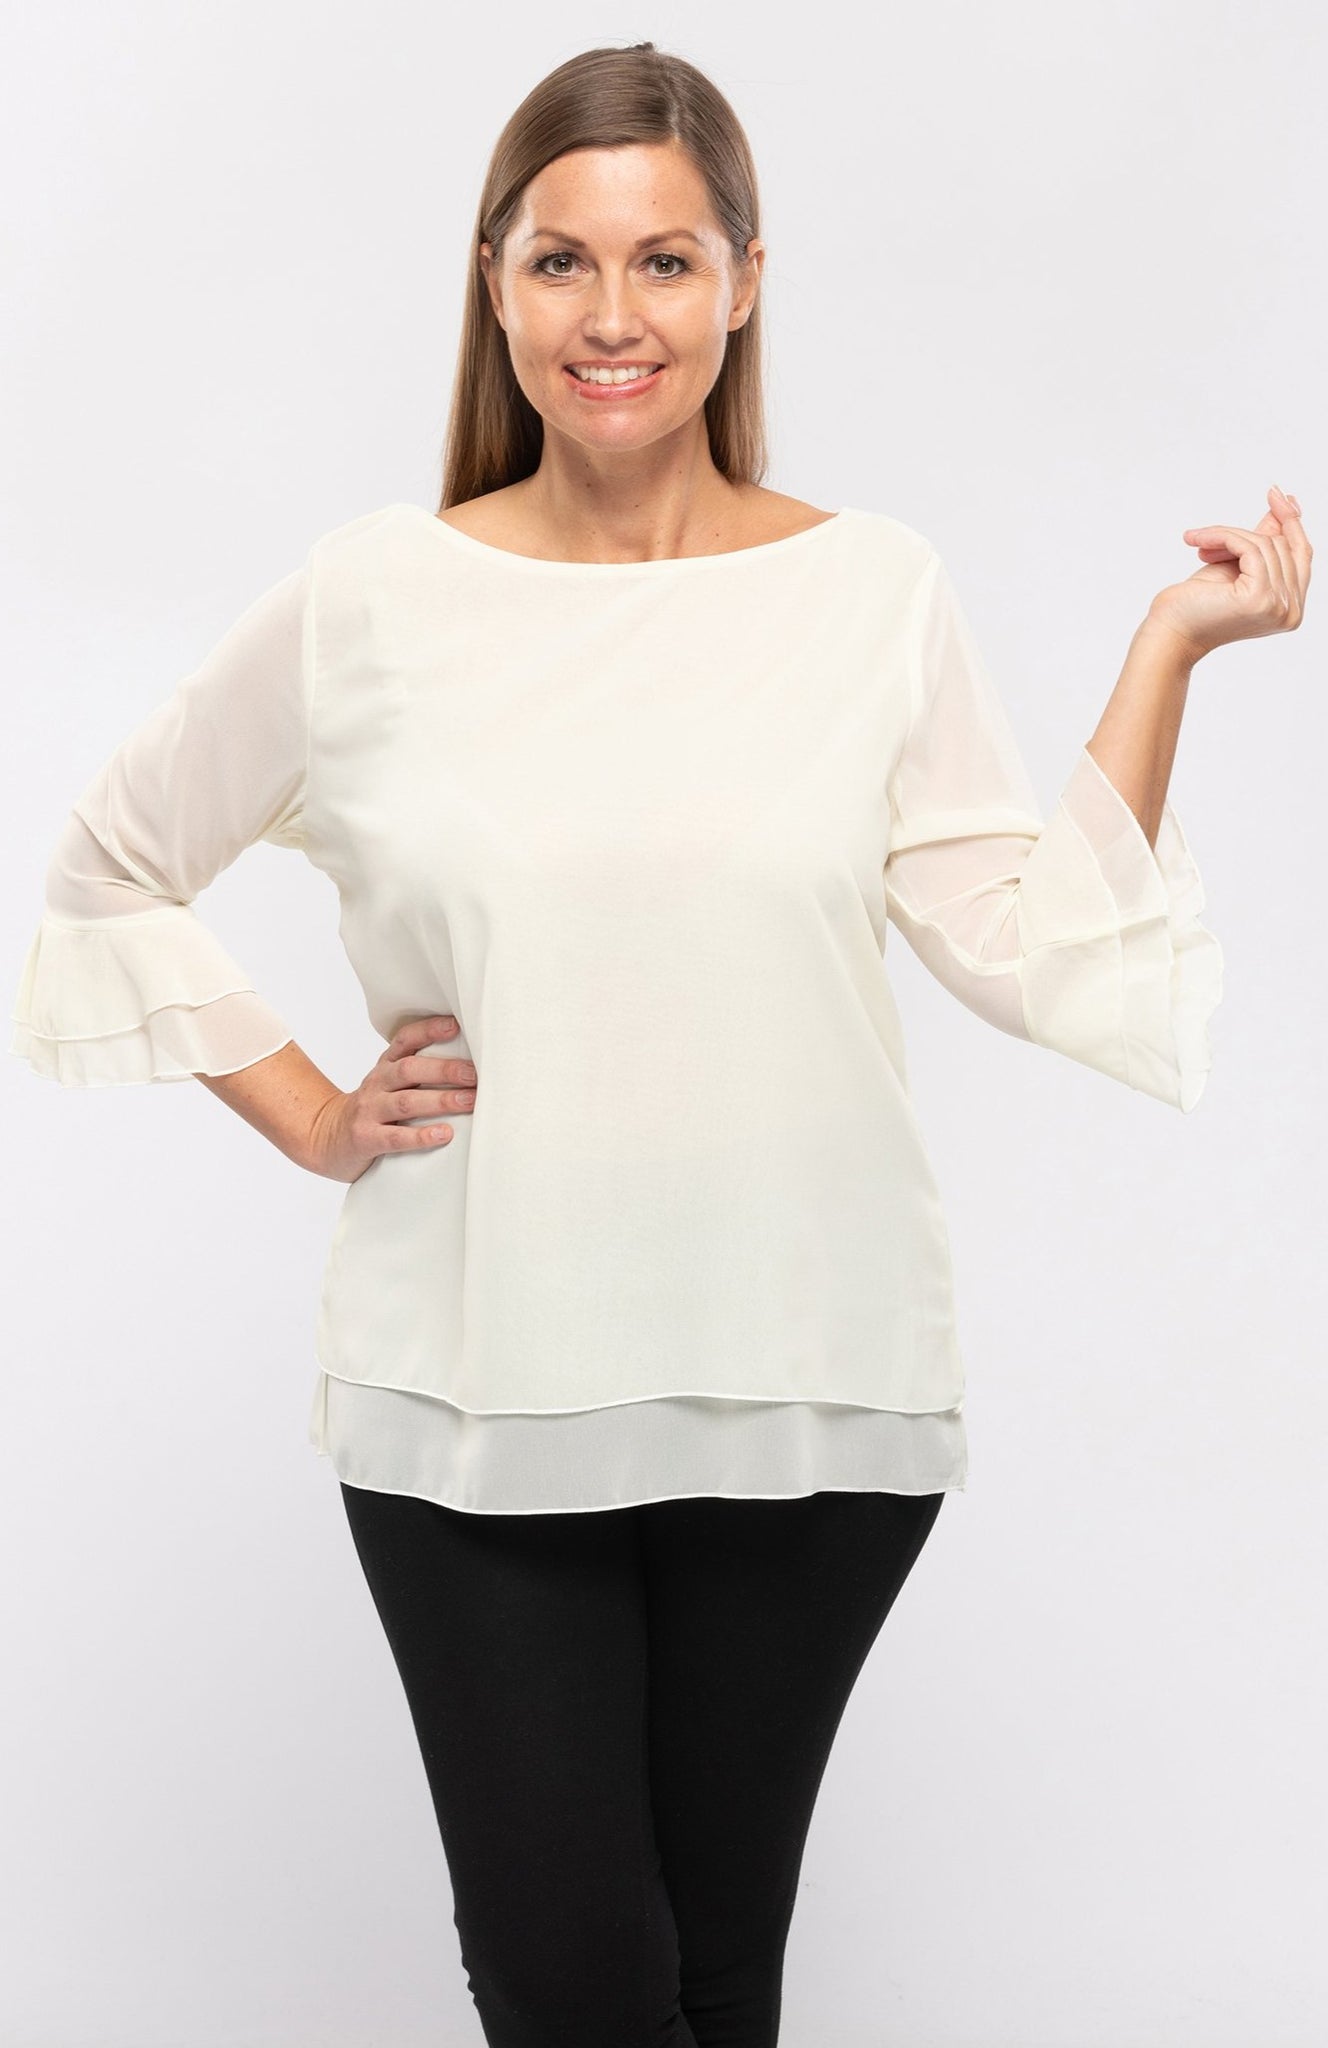 Women's Soft Layered Top-2 Colors/3 Sizes-12pcs/pack ($9.90/pc) OR 6pcs/pack ($11.90/pc) - SALE! - CHOOSE PACK SIZE TO SEE LOWER PRICES